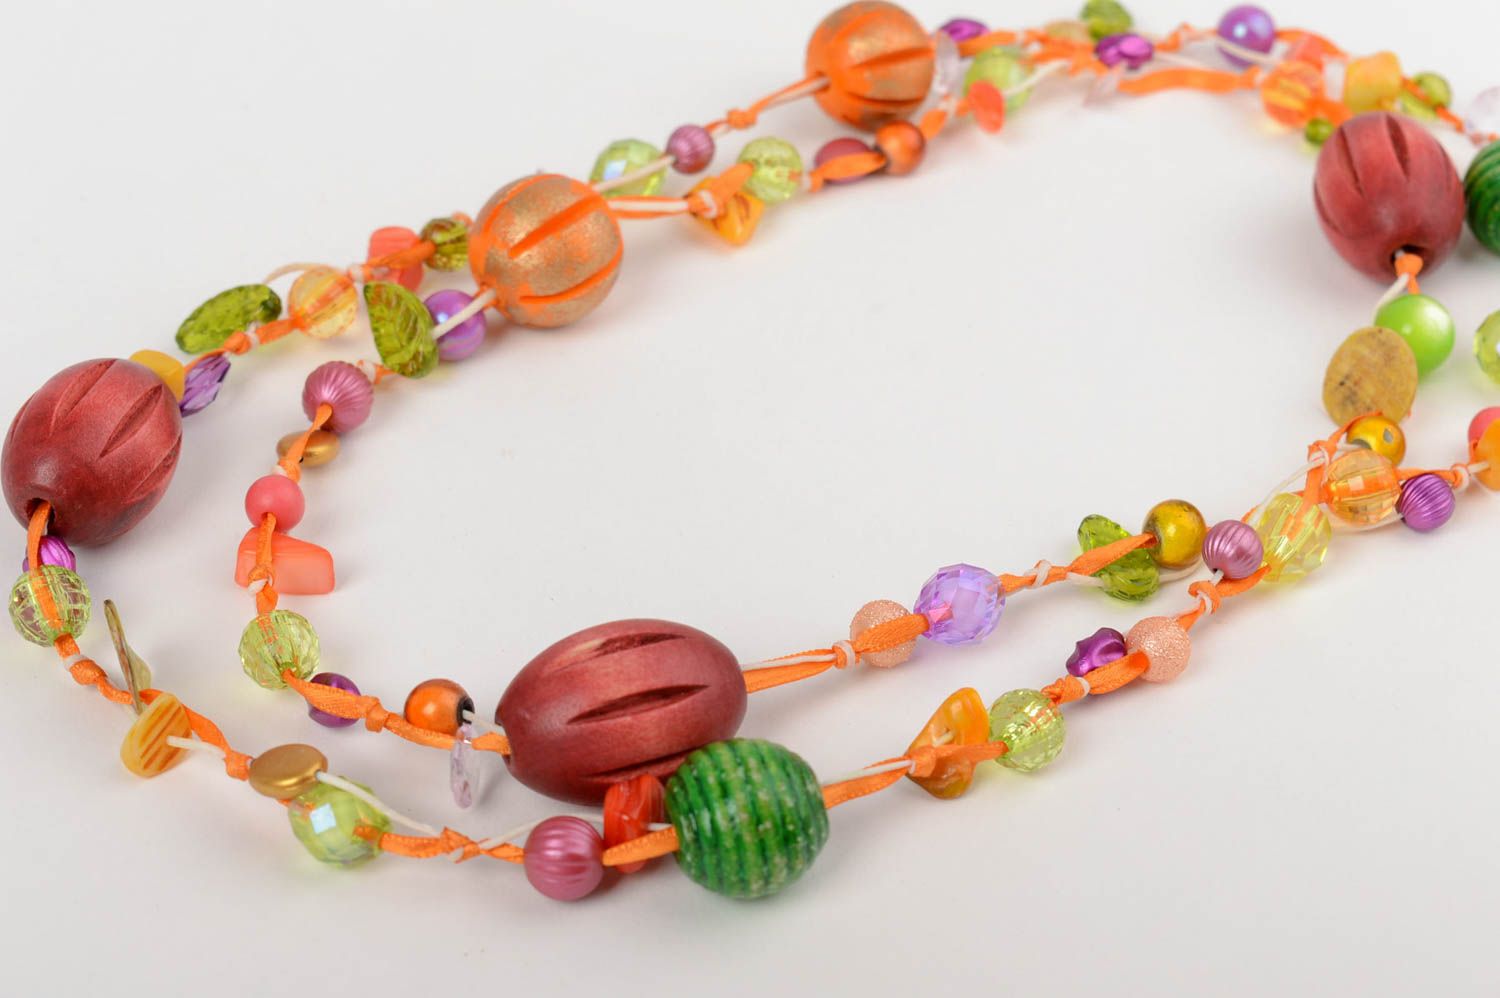 Handmade long designer necklace with colorful wooden and plastic beads photo 4